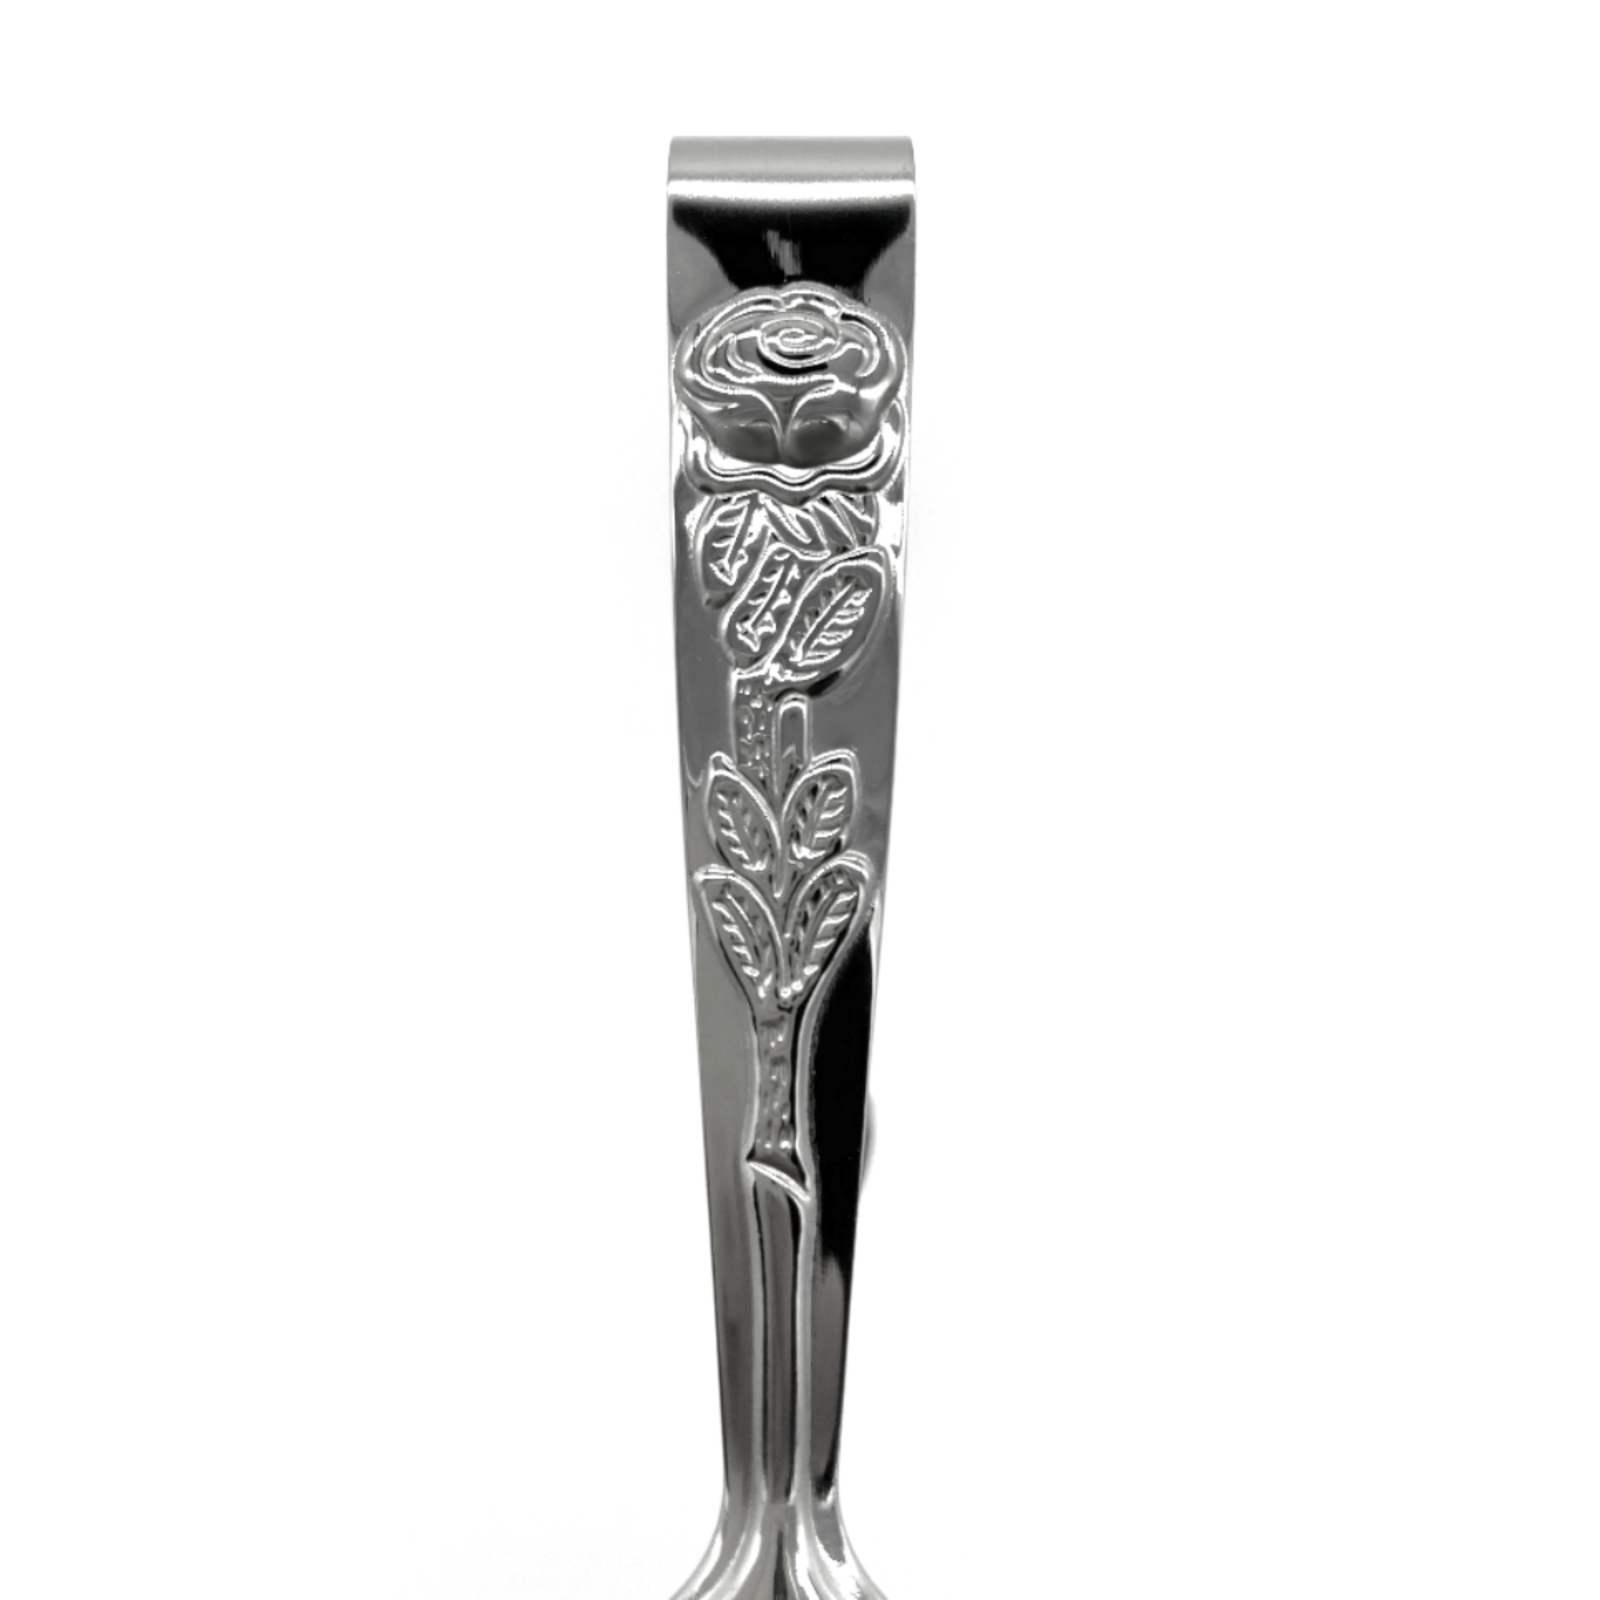 The Gallery Rose Handle Sugar Tong Stainless Steel (Silver) loading=